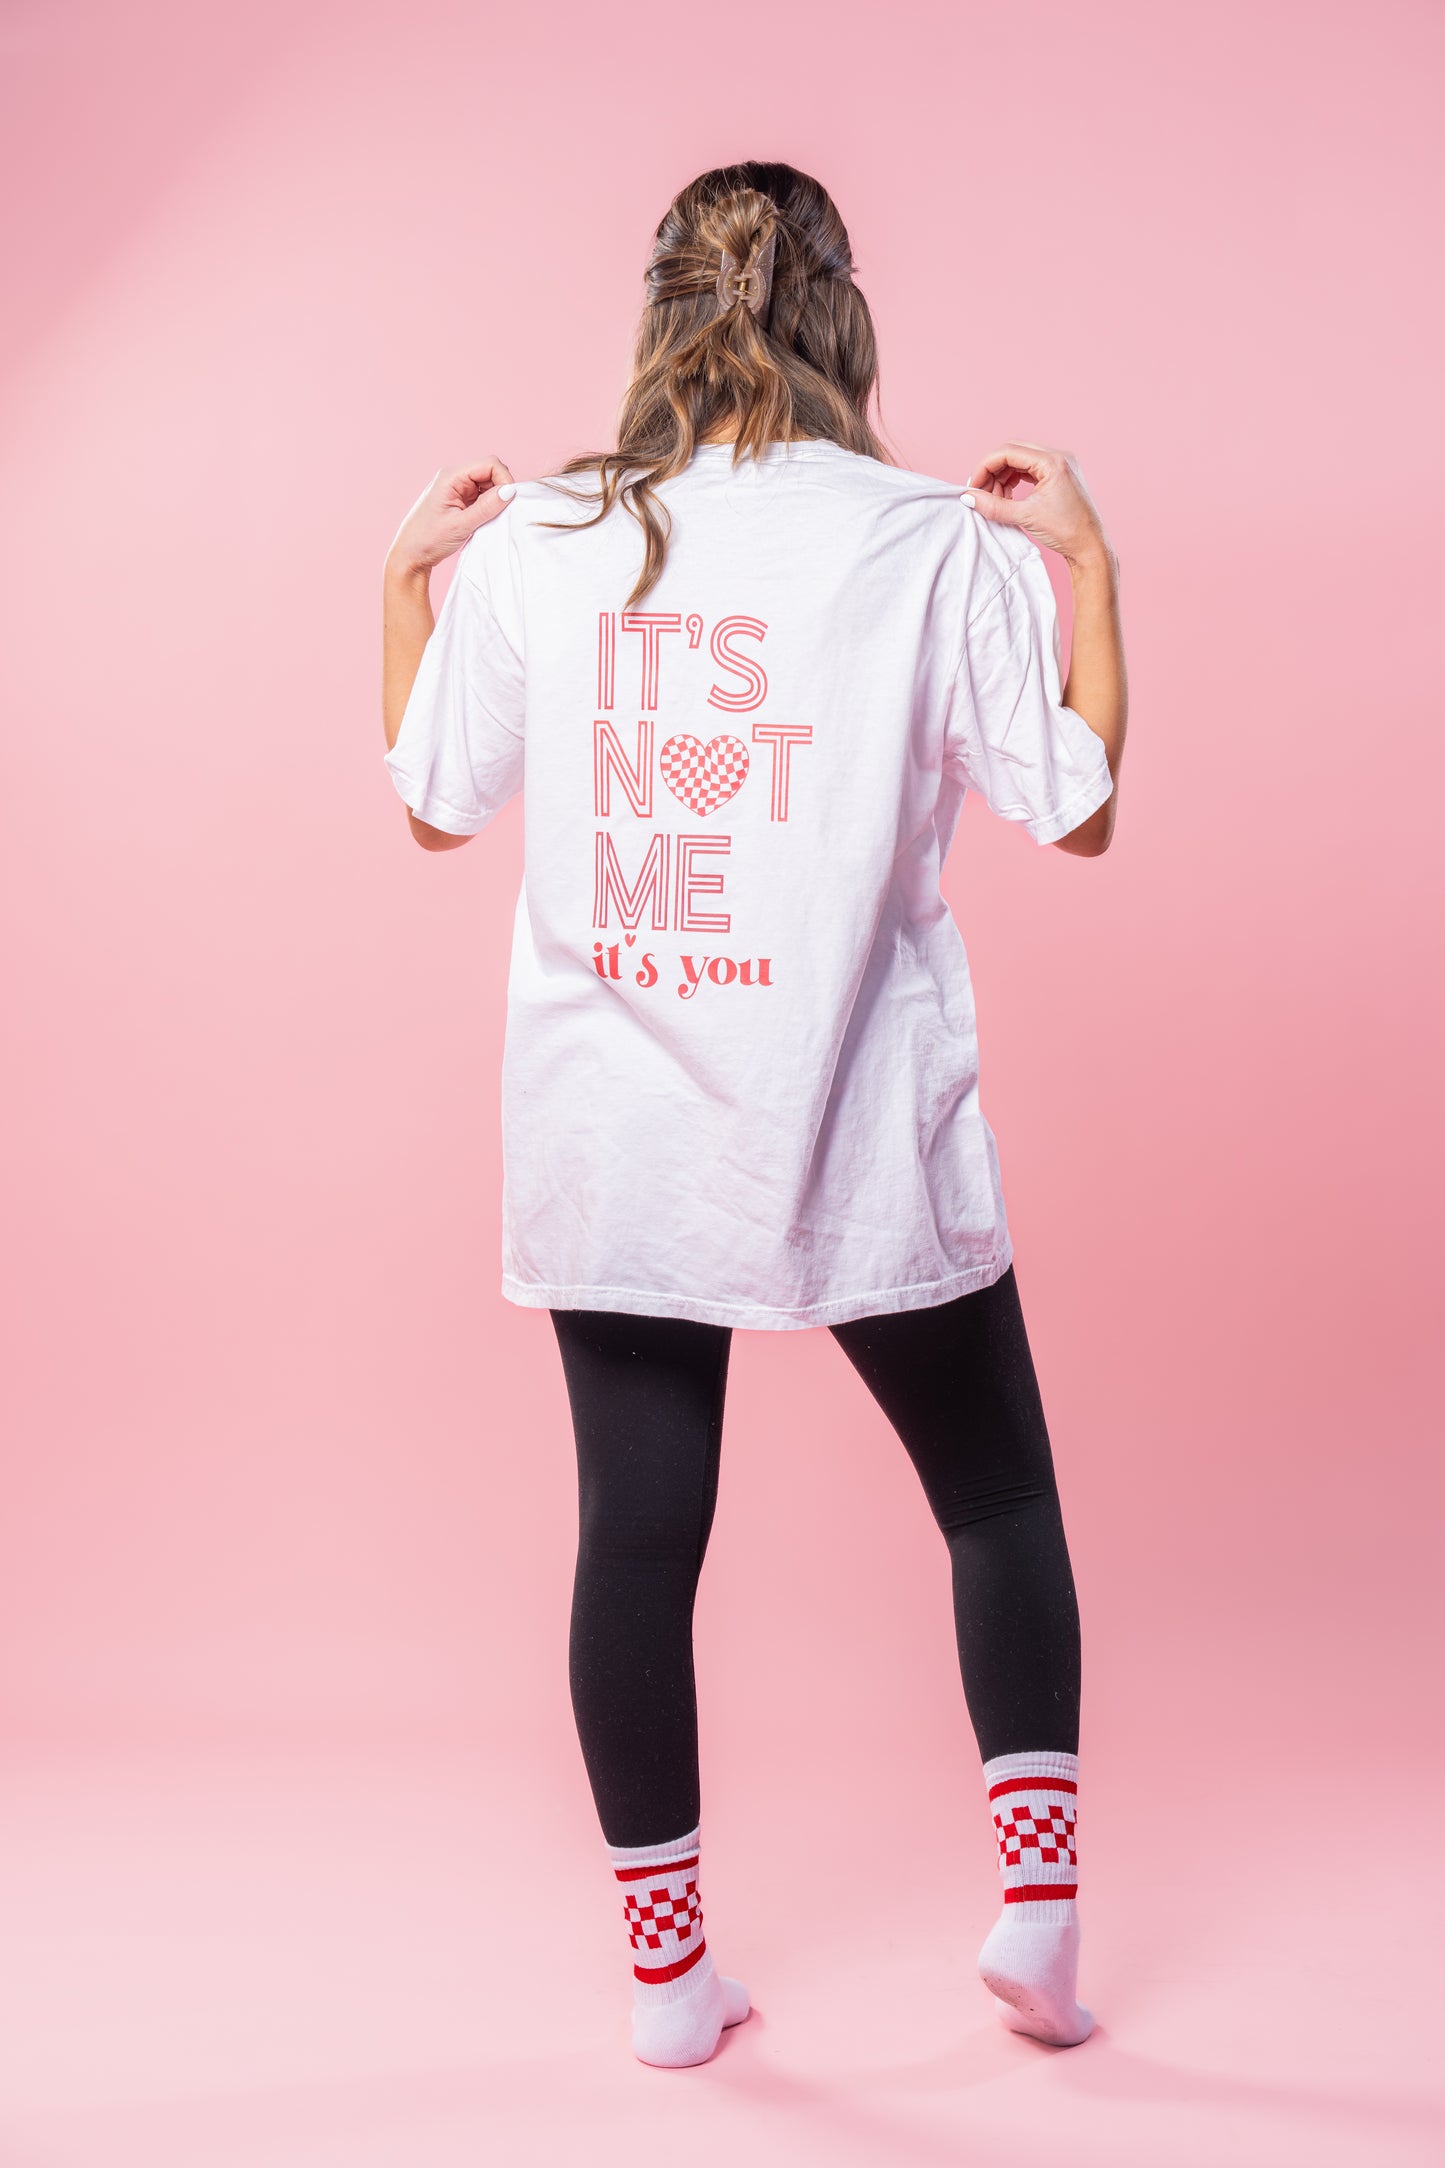 It's Not Me, It's You (Pocket & Back) - Tee (Vintage White, Short Sleeve)